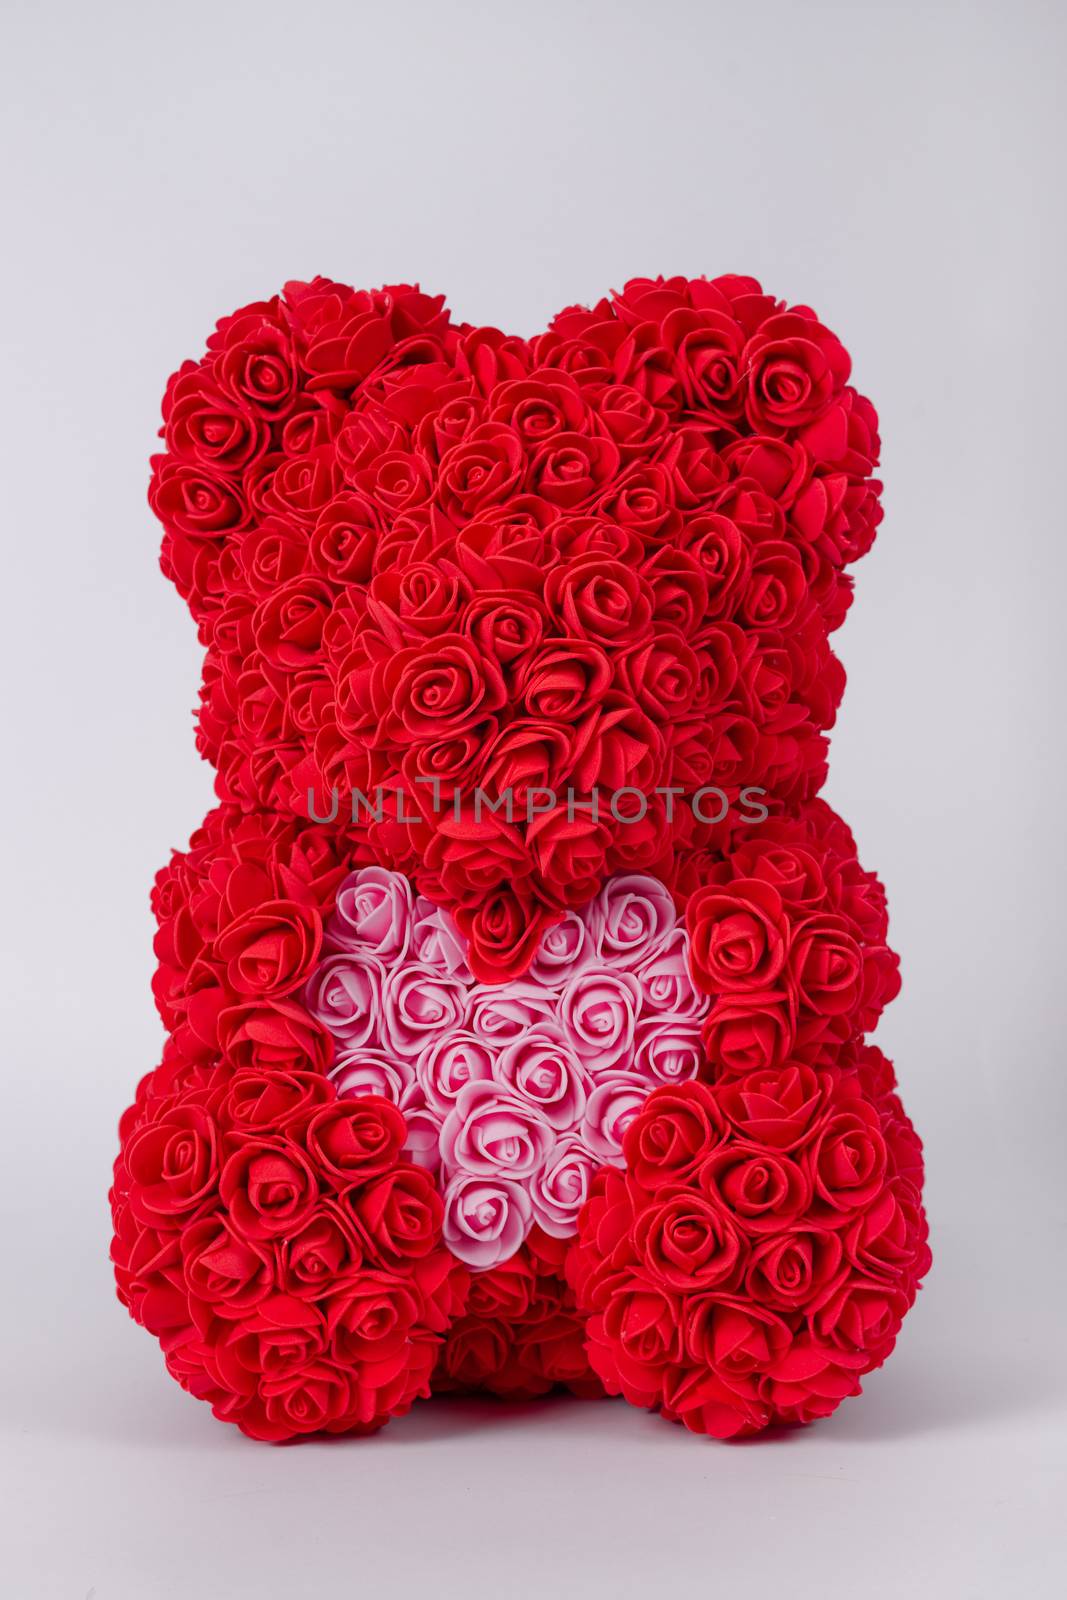 Red  teddy bear toy of foamirane roses. Pink heart in teddy paws. Stock photo isolated on white background.